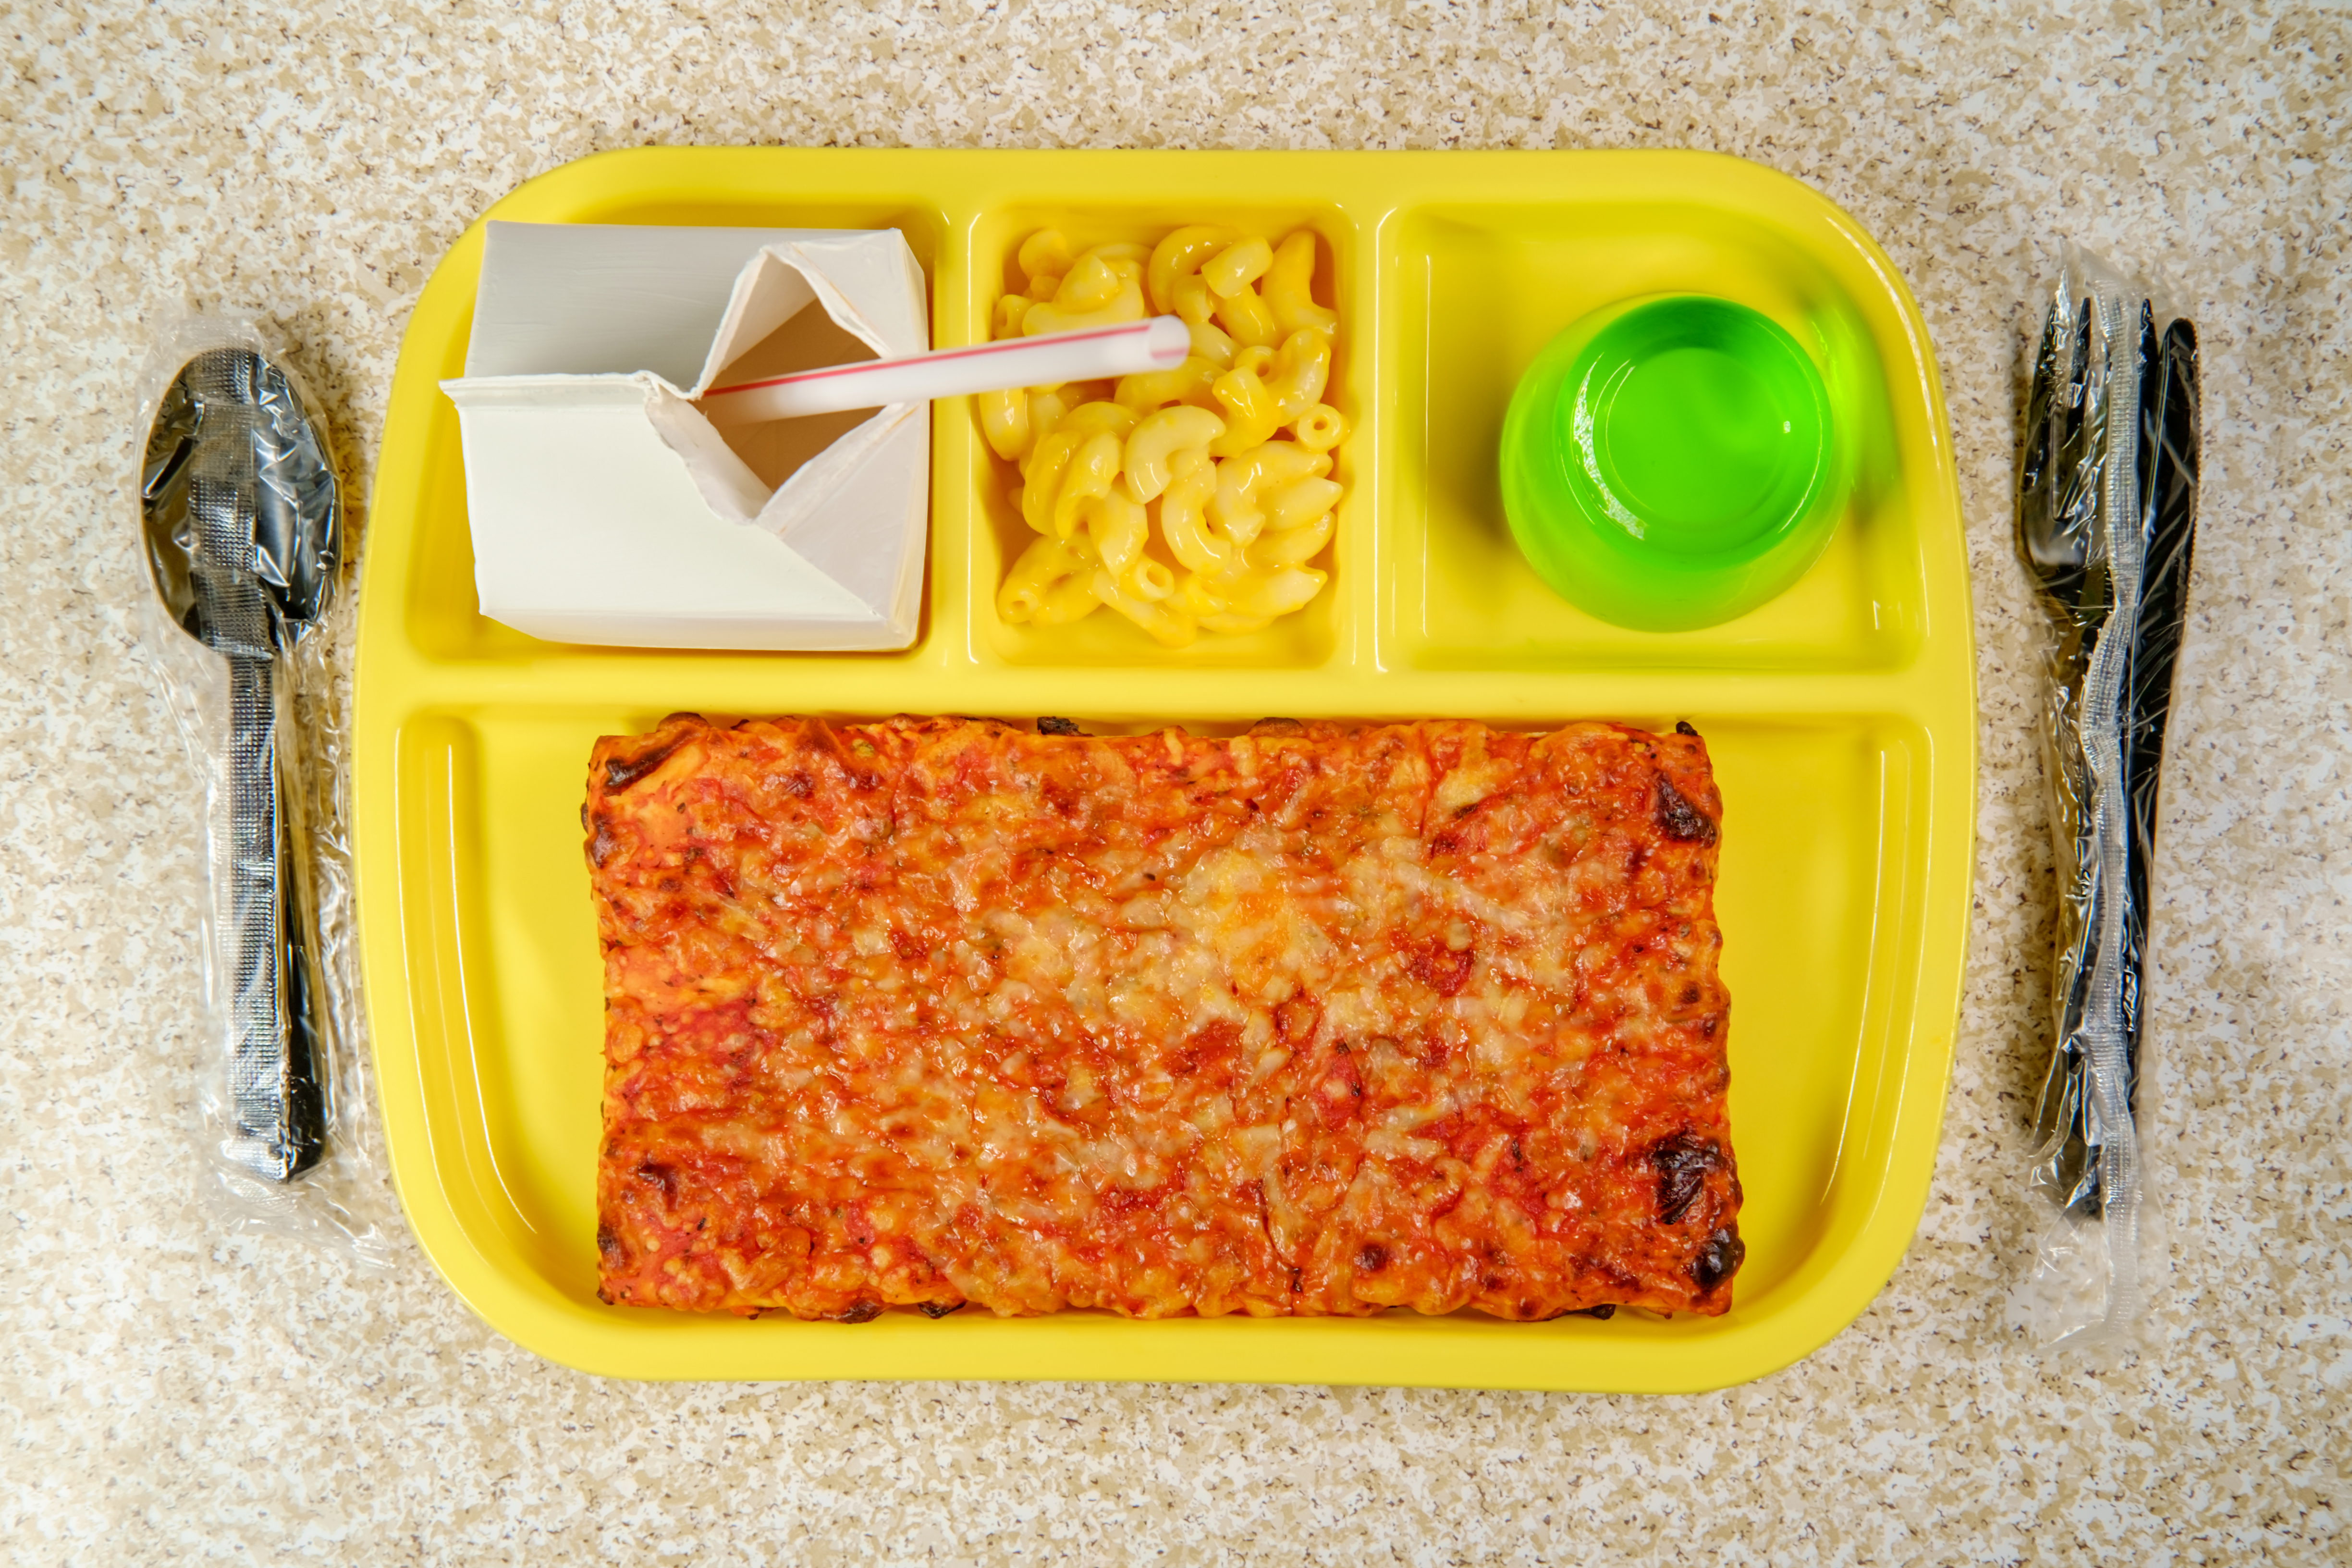 Bright yellow cafeteria tray with a square slab of pizza, open milk carton with straw, macaroni and cheese, and glass.